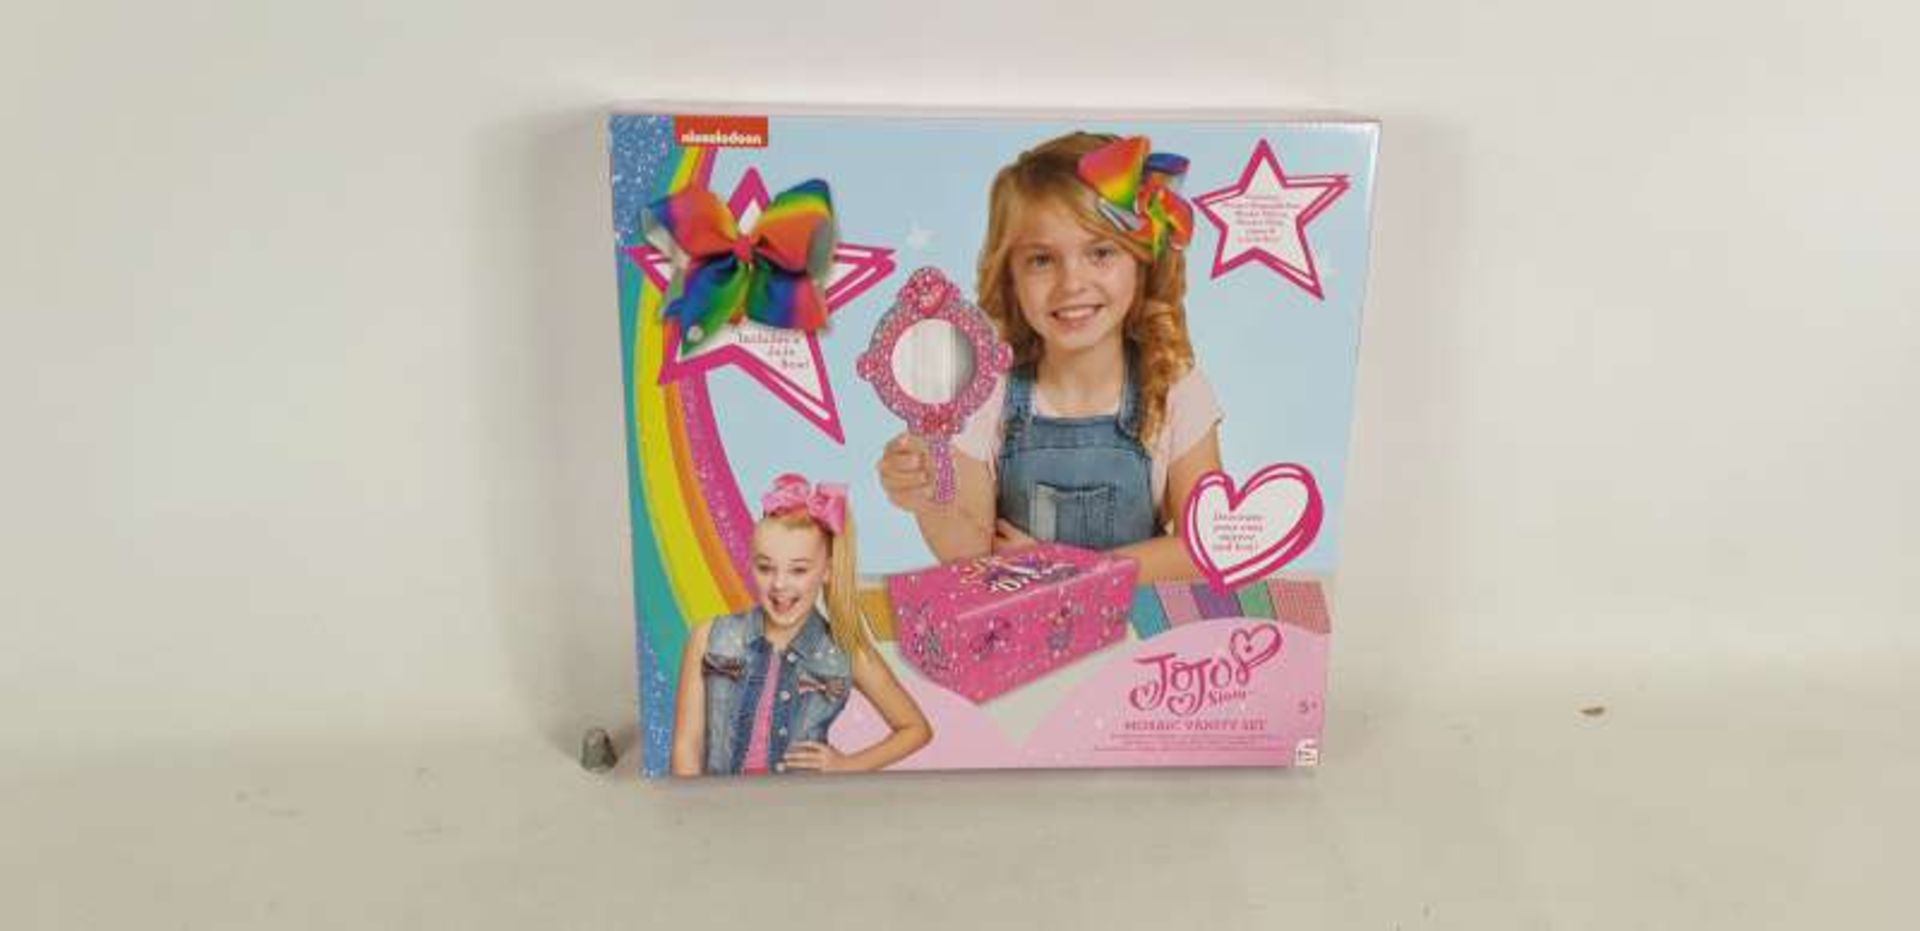 30 X BRAND NEW BOXED JOJO SIWA BOW MIRROR BEAUTY SETS IN 5 BOXES